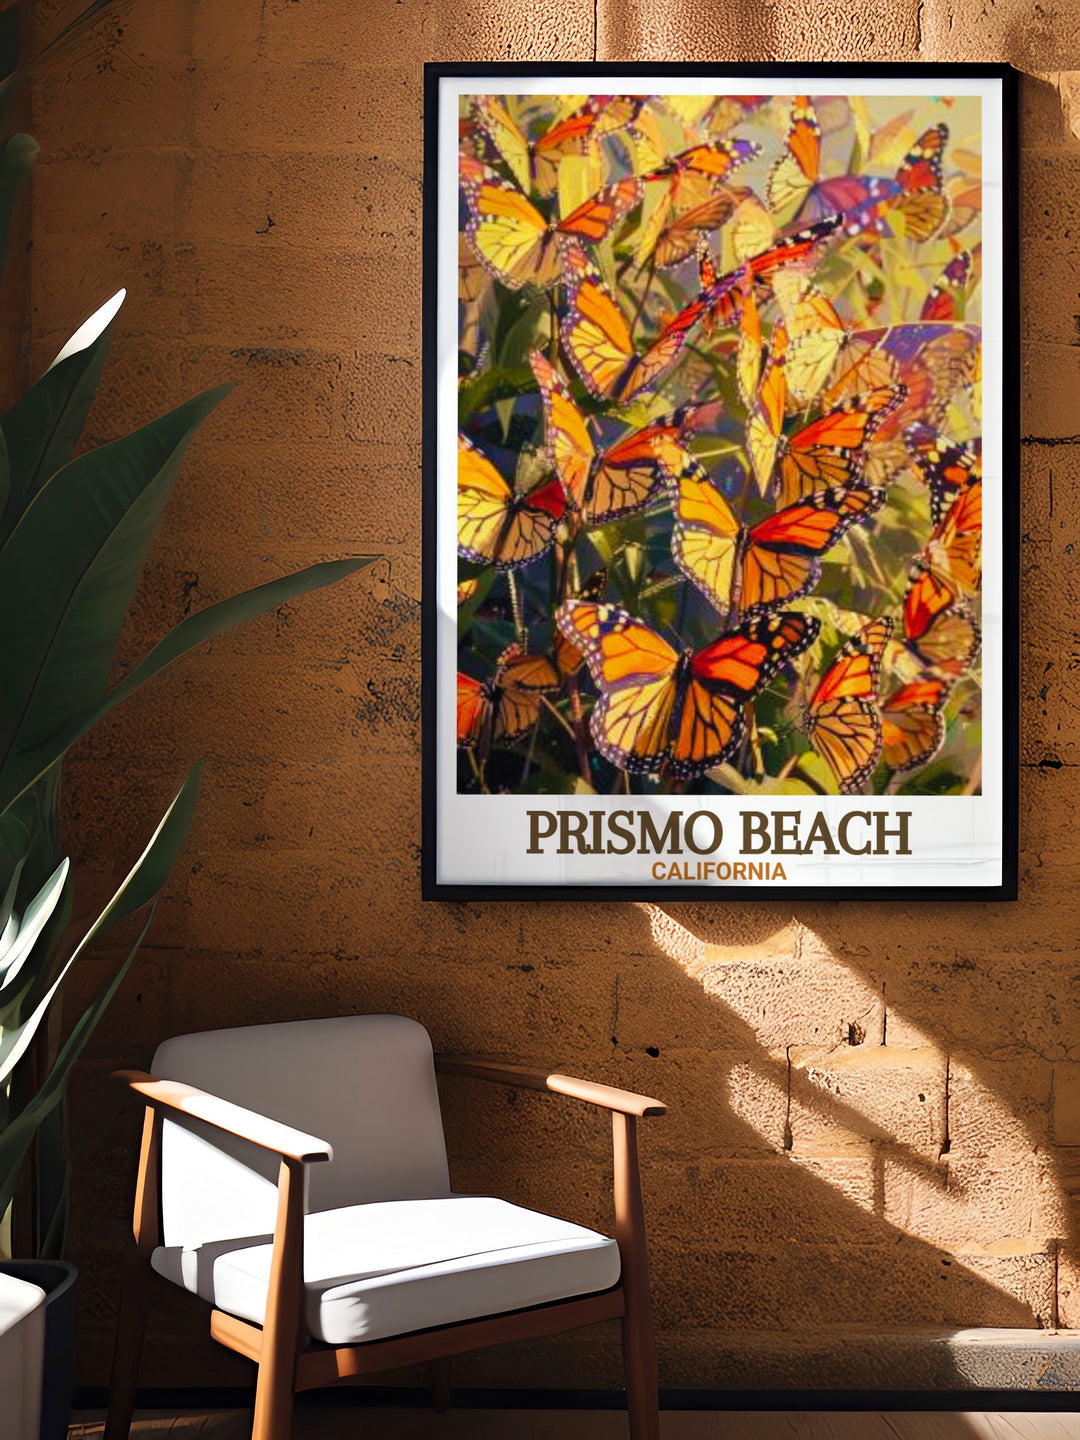 California Wall Decor showcasing the beauty of Pismo Beach a great addition to any room Monarch Butterfly Grove prints bring natural beauty and tranquility to your home